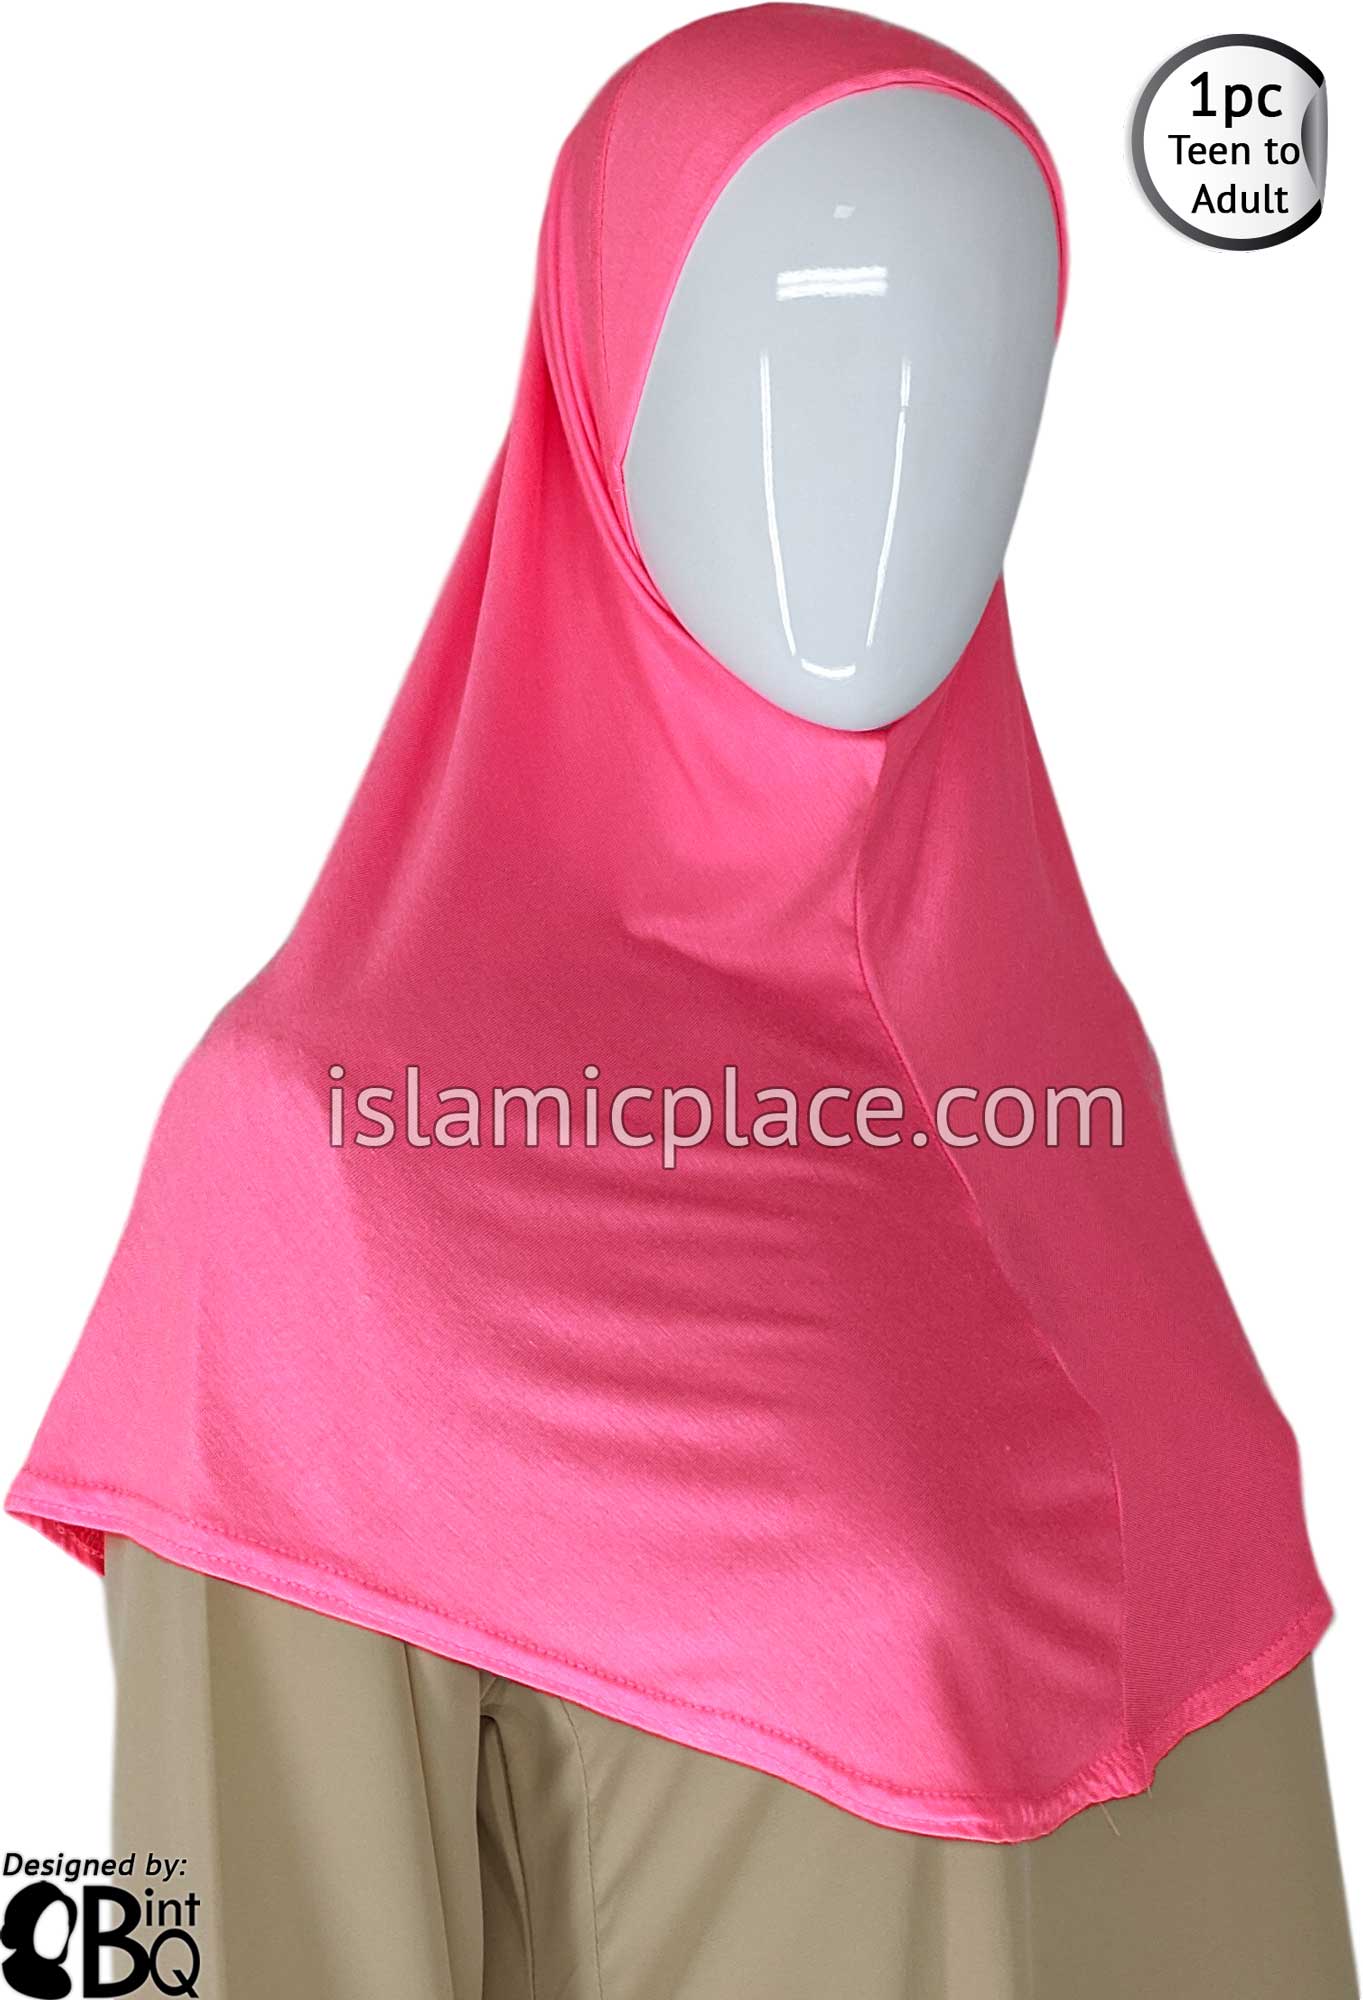 Perseus dynamisch Derbevilletest Fuchsia Pink - Plain Teen to Adult (Large) Hijab Al-Amira (1-piece sty -  The Islamic Place